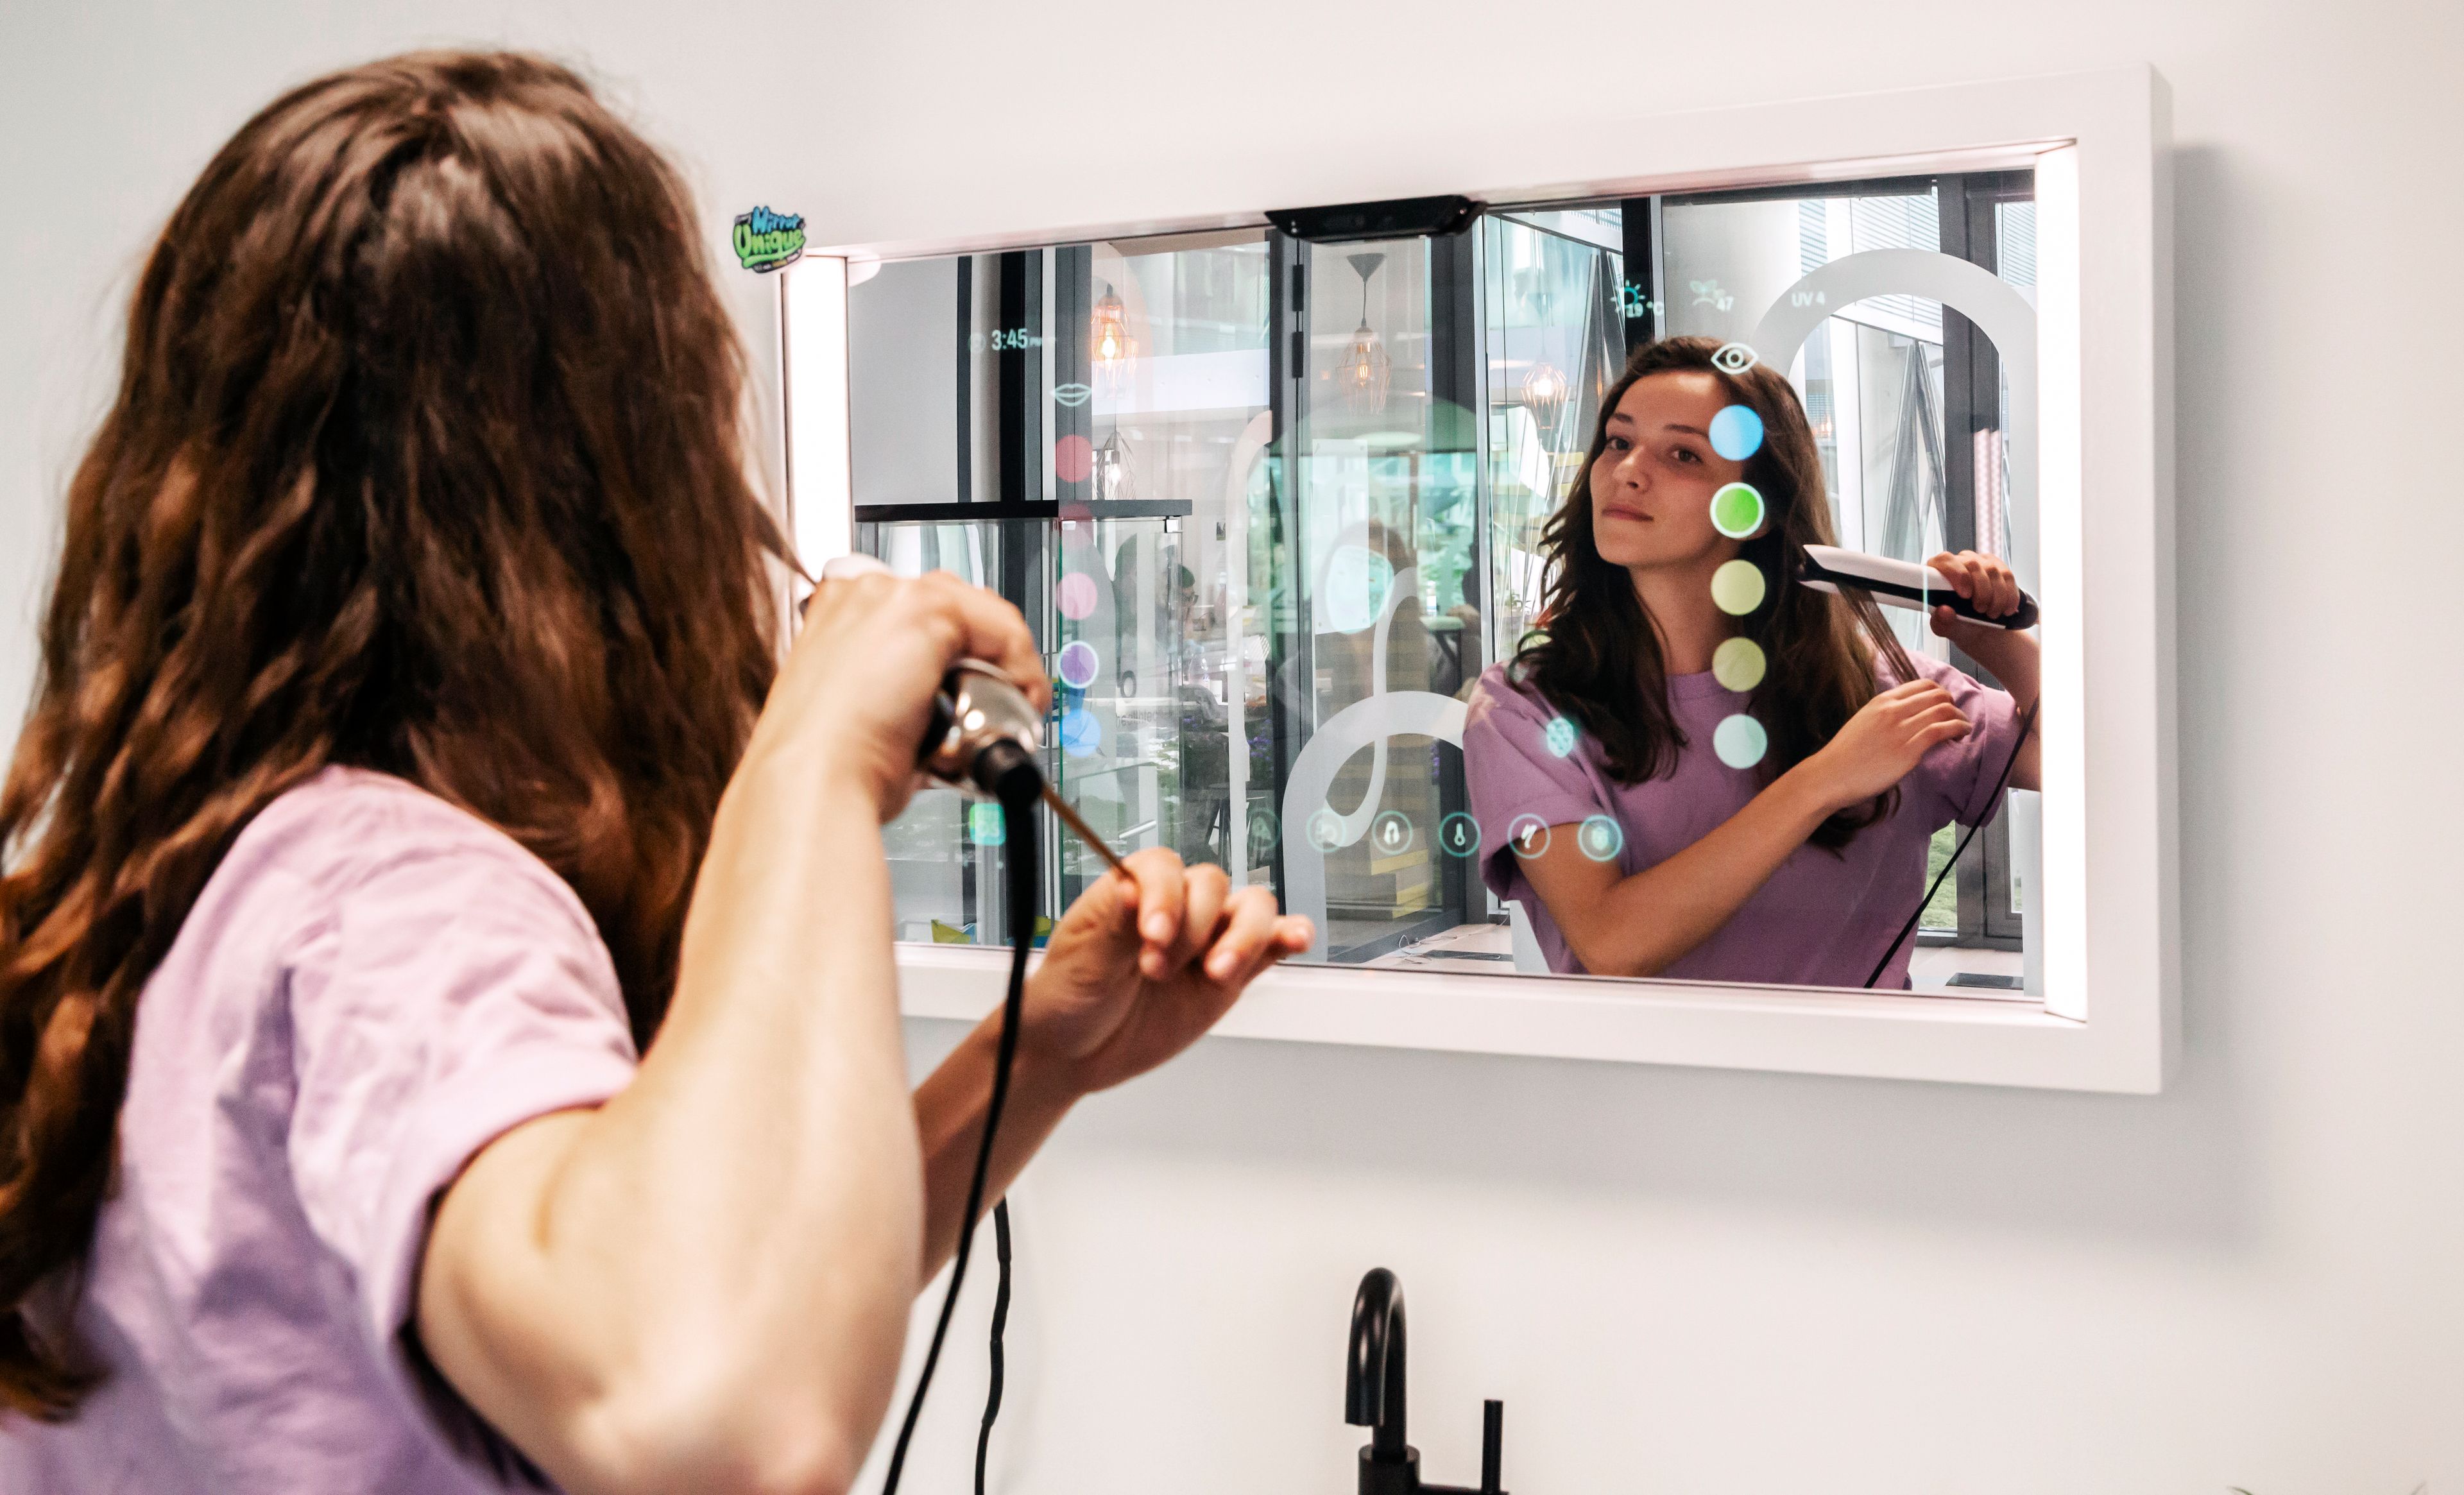 Woman straightening hair looking at connected beauty mirror